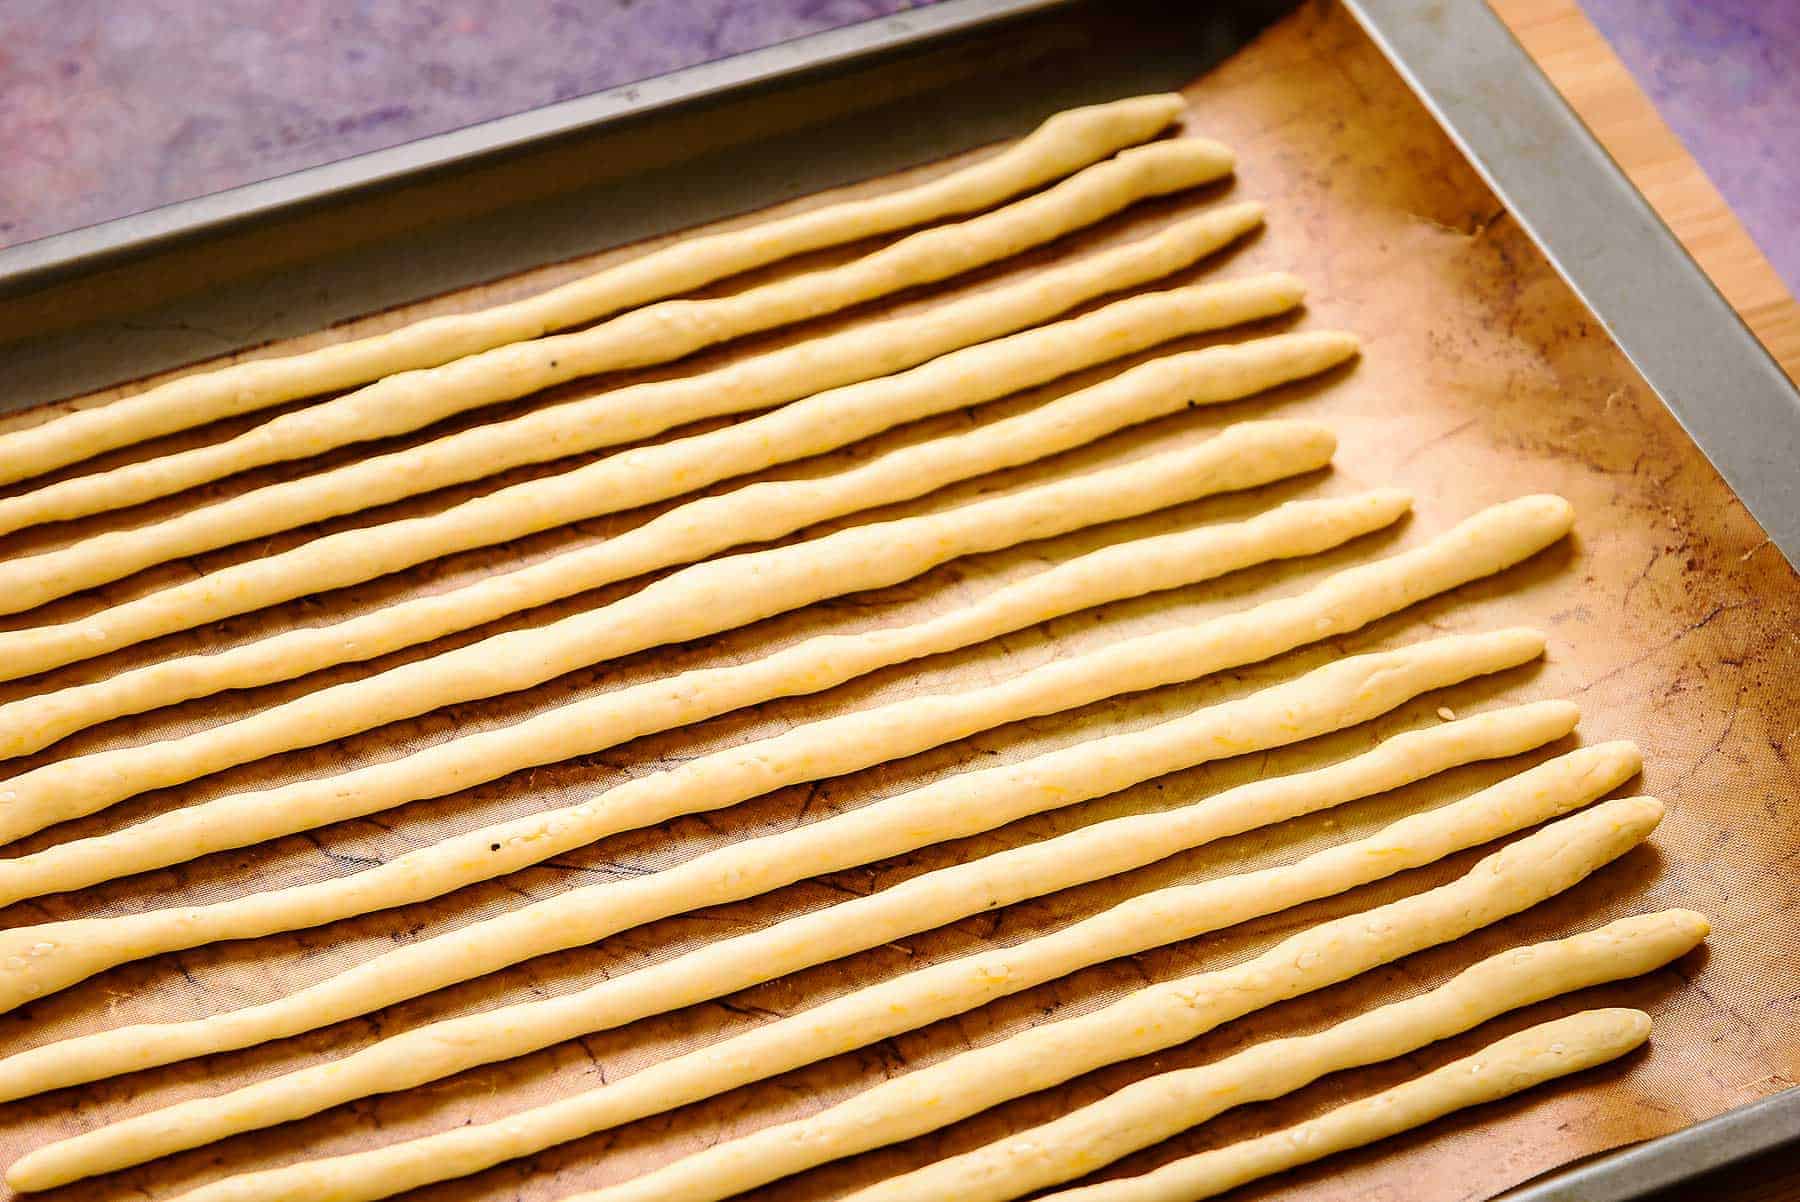 Rolled dough into long thin strips for baking